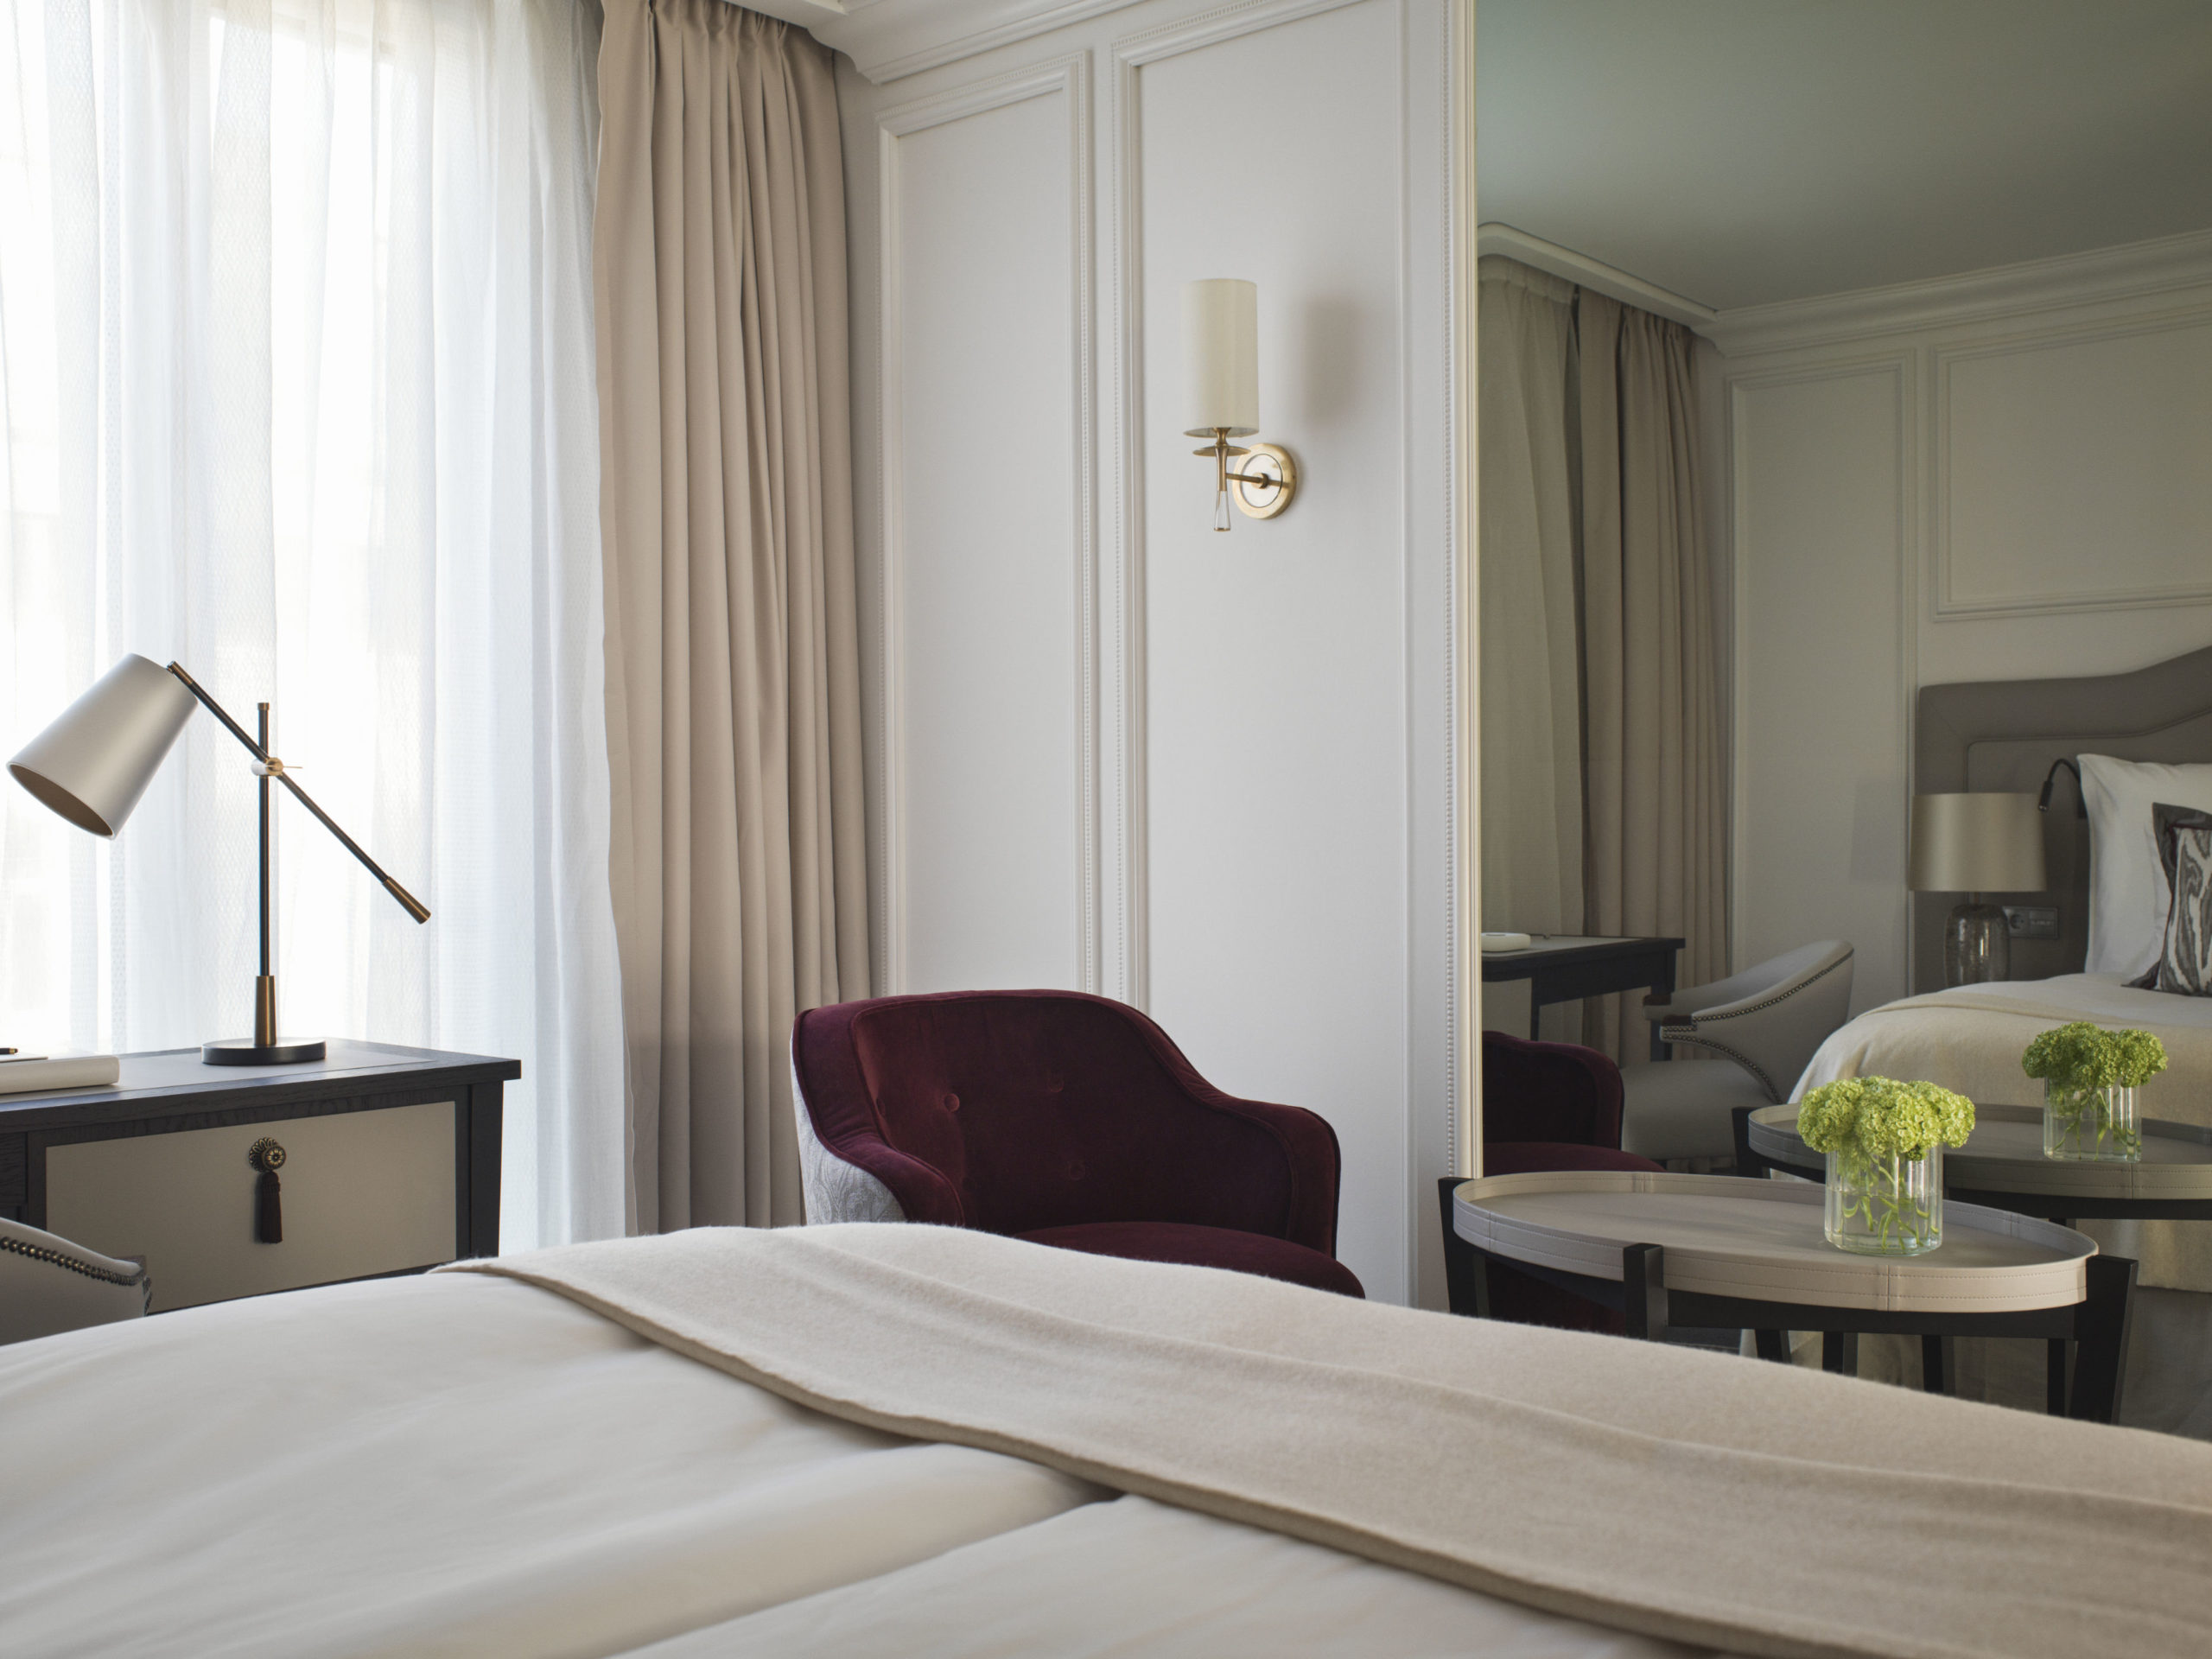 A superior room with comfortable Hästens bed, an office desk, lounge chair and coffee table